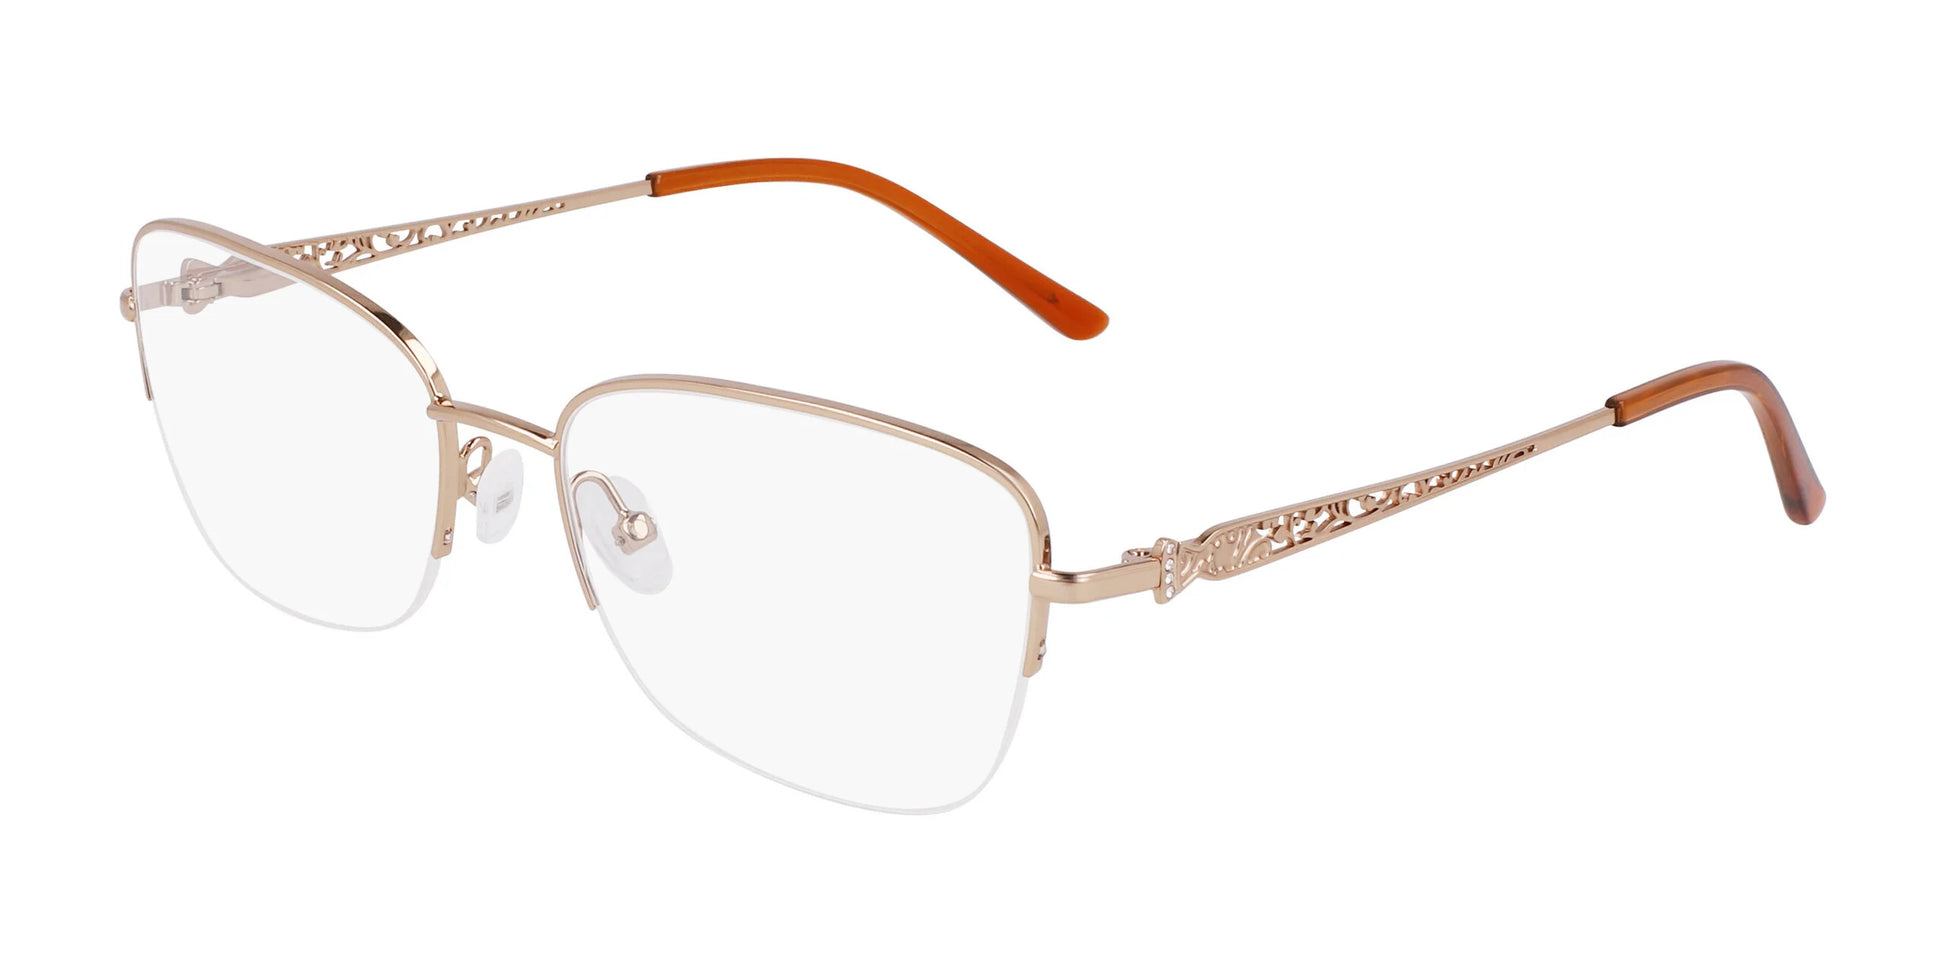 Marchon NYC TRES JOLIE 200 Eyeglasses Taupe